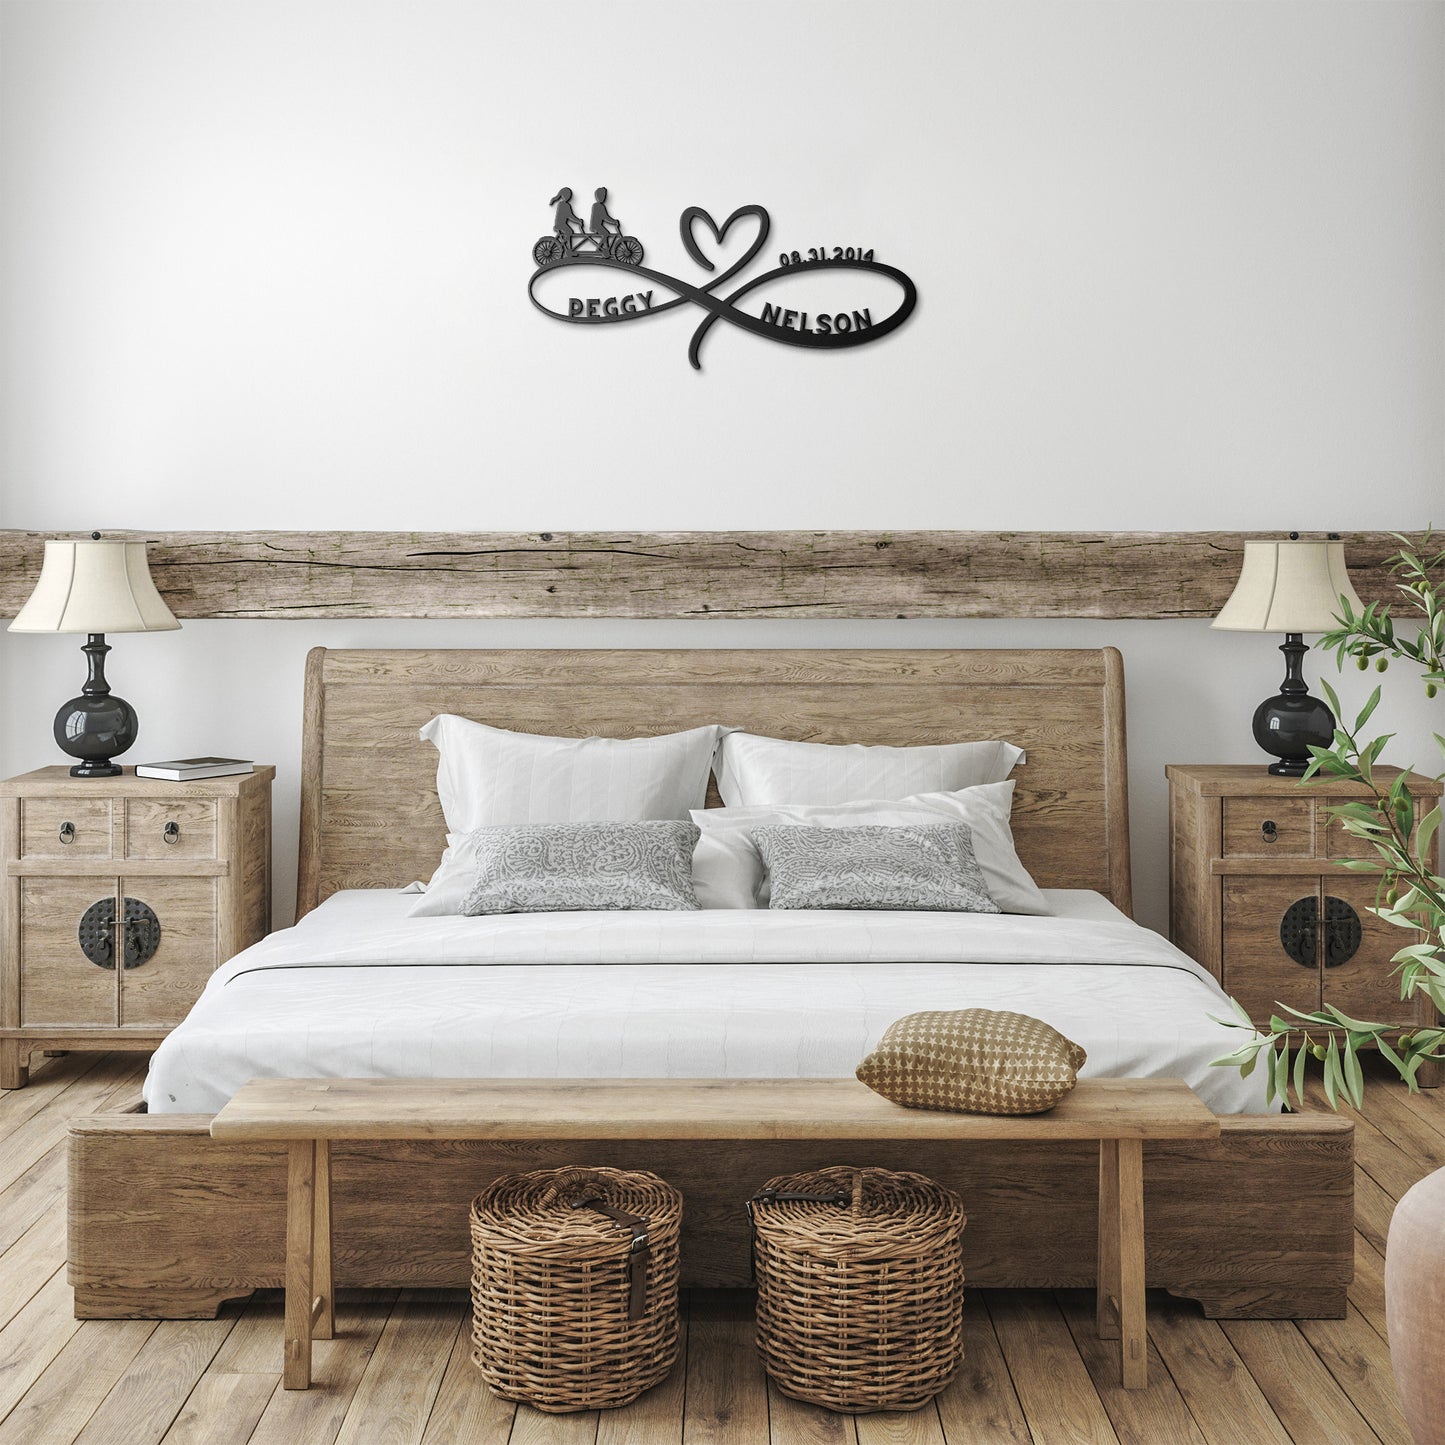 A bedroom with a teelaunch Personalized Infinity Love Heart Metal Sign For Cycling Couples and a powder-coated bedside table.